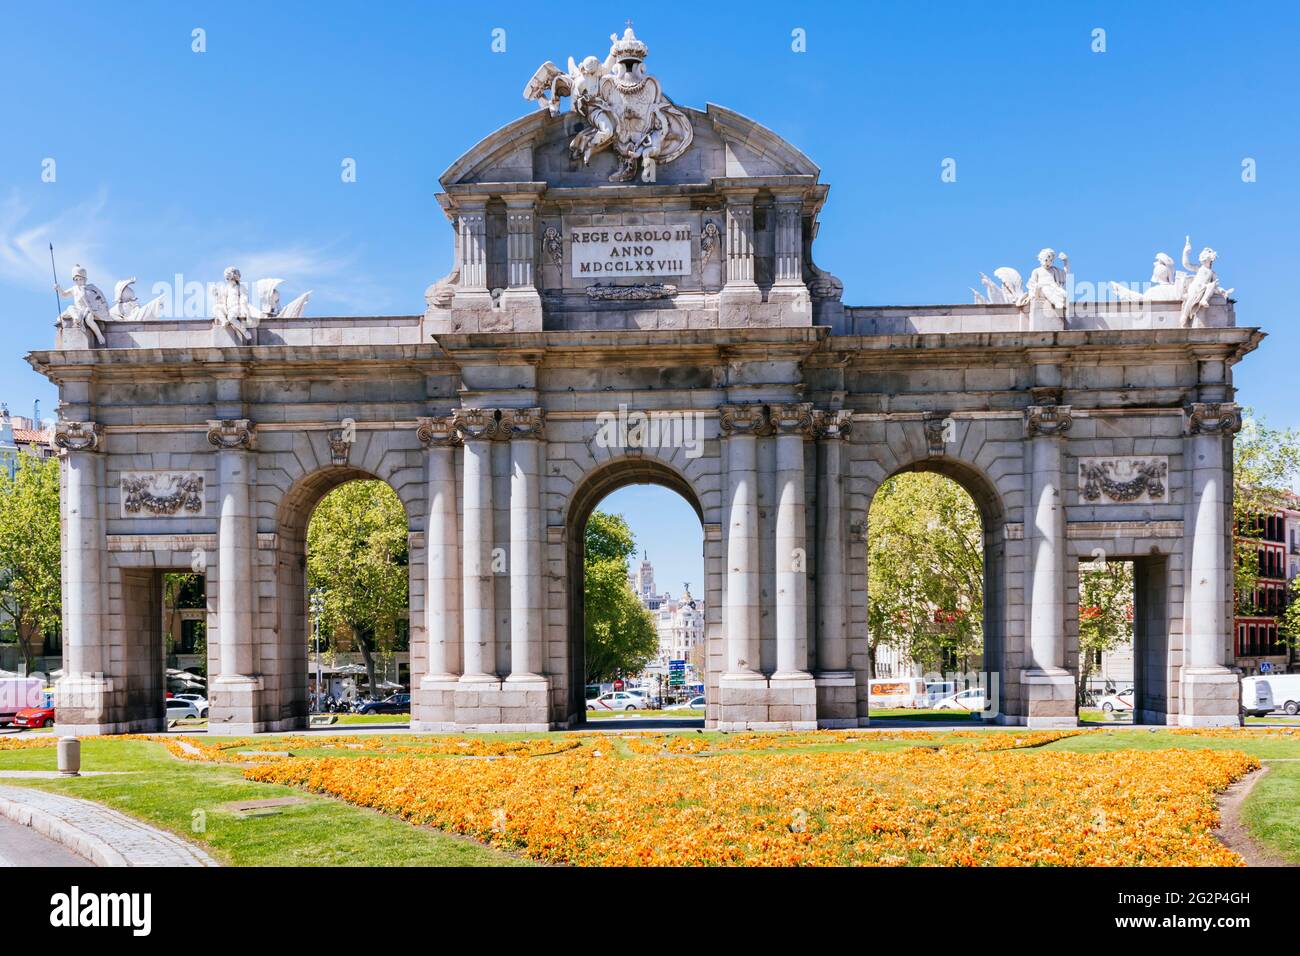 East side. The Puerta de Alcalá is one of the five old royal gates that gave access to the city of Madrid, is a Neo-classical gate in the Plaza de la Stock Photo